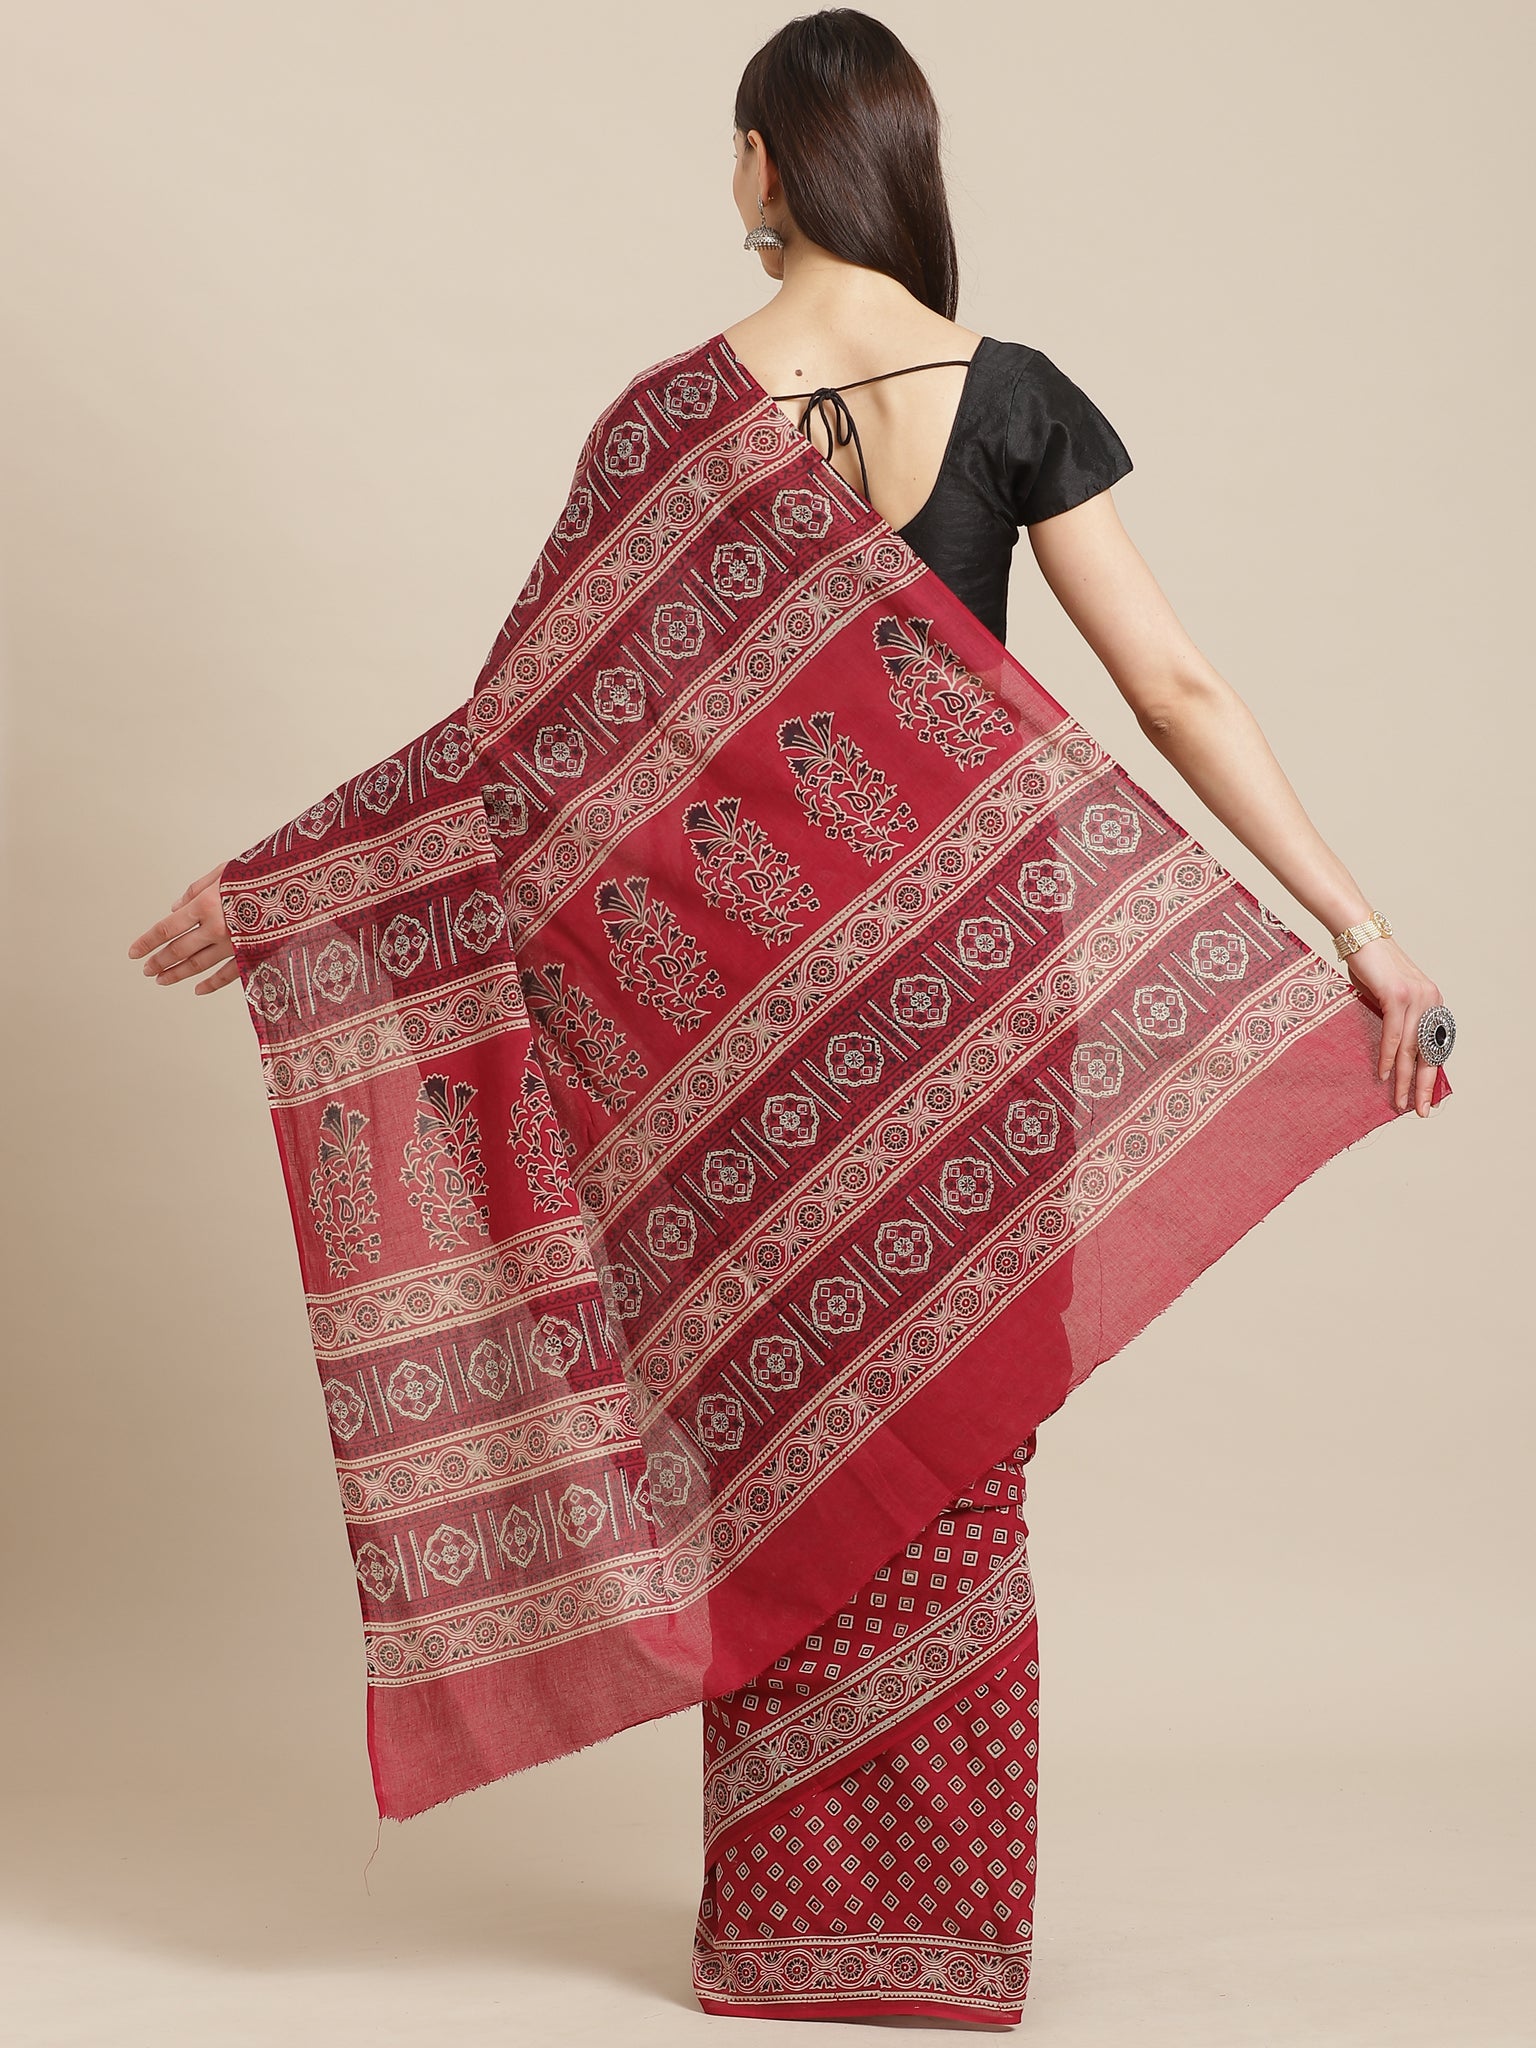 Maroon and Black, Kalakari India Cotton Maroon Hand crafted saree with blouse BAPASA0104-Saree-Kalakari India-BAPASA0104-Block Print, Cotton, Geographical Indication, Hand Crafted, Heritage Prints, Natural Dyes, Red, Sarees, Sustainable Fabrics, Woven, Yellow-[Linen,Ethnic,wear,Fashionista,Handloom,Handicraft,Indigo,blockprint,block,print,Cotton,Chanderi,Blue, latest,classy,party,bollywood,trendy,summer,style,traditional,formal,elegant,unique,style,hand,block,print, dabu,booti,gift,present,glamo